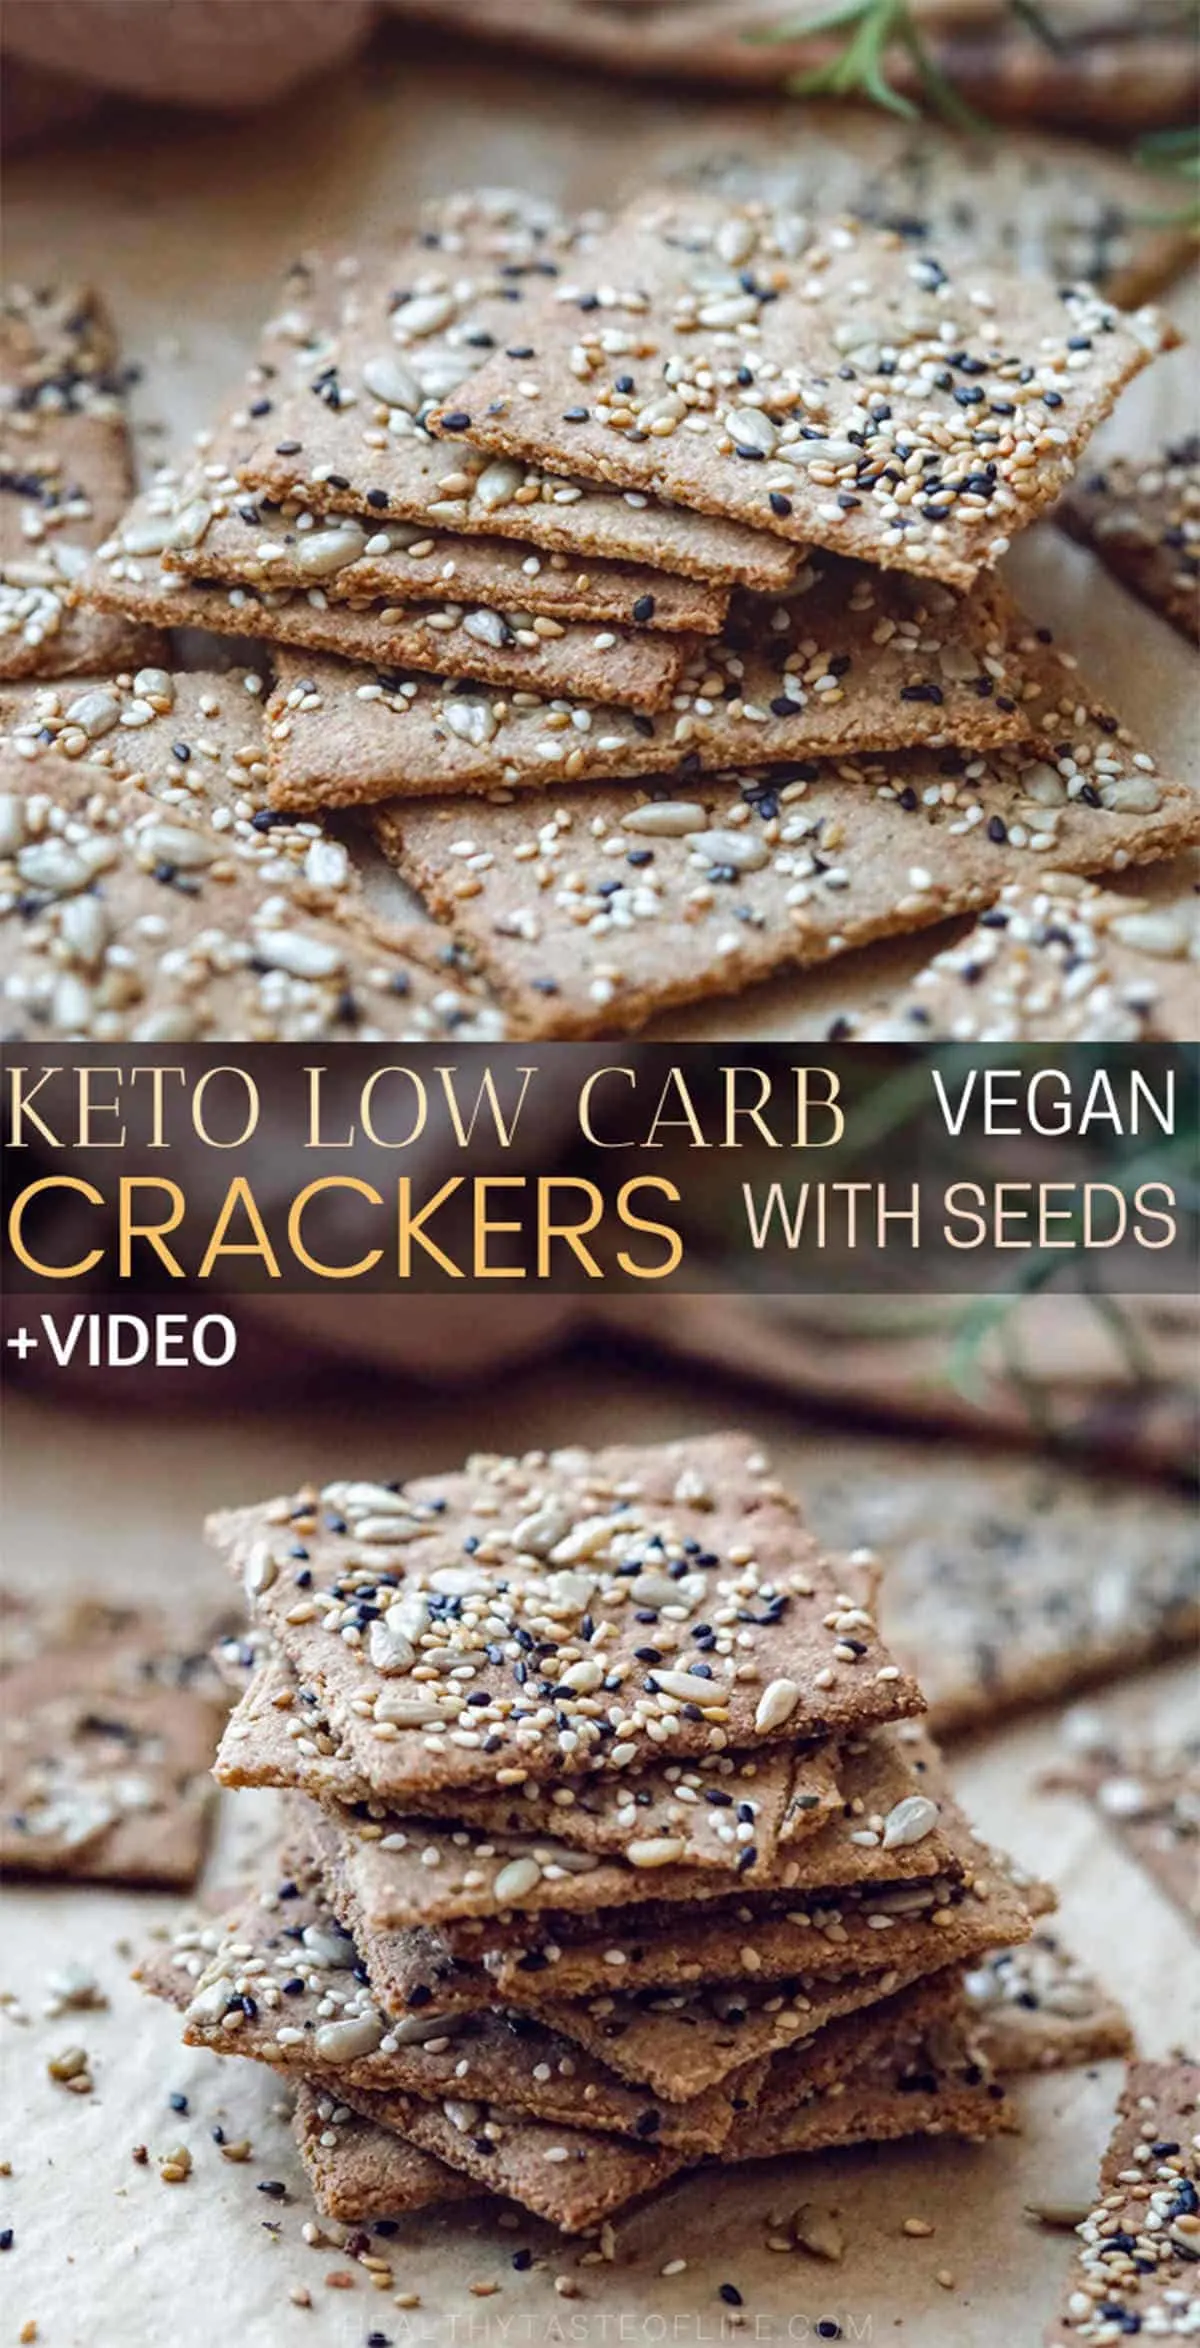 Crispy homemade low carb keto seed crackers recipe (+ video) that's also dairy free, gluten free, grain free, nut free, paleo and vegan. These keto crackers are made with flax seeds, sunflower seeds, sesame seeds healthy fat and grain free flour. A low carb keto snack great for anyone who is following a dairy free, vegan keto diet, no cheese, no eggs and no almond flour here. #ketocrackers #ketoseedcrackers 
#ketocrackersrecipe #vegan #dairyfree #snack #lowcarb#ketocrackersrecipe #vegan #dairyfree #snack #lowcarb#ketocrackersrecipe #vegan #dairyfree #snack #lowcarb